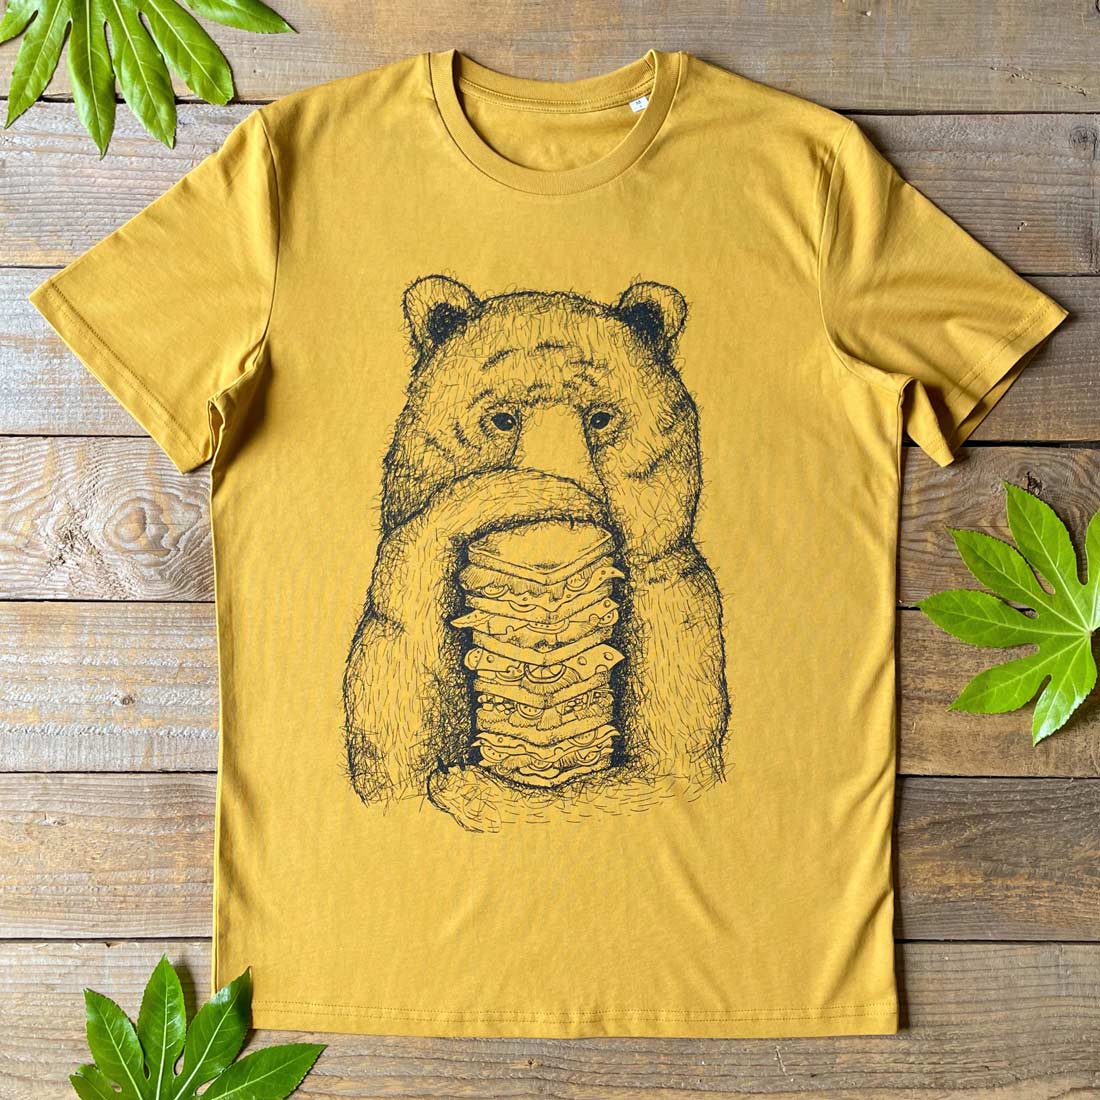 mustard t-shirt with bear on